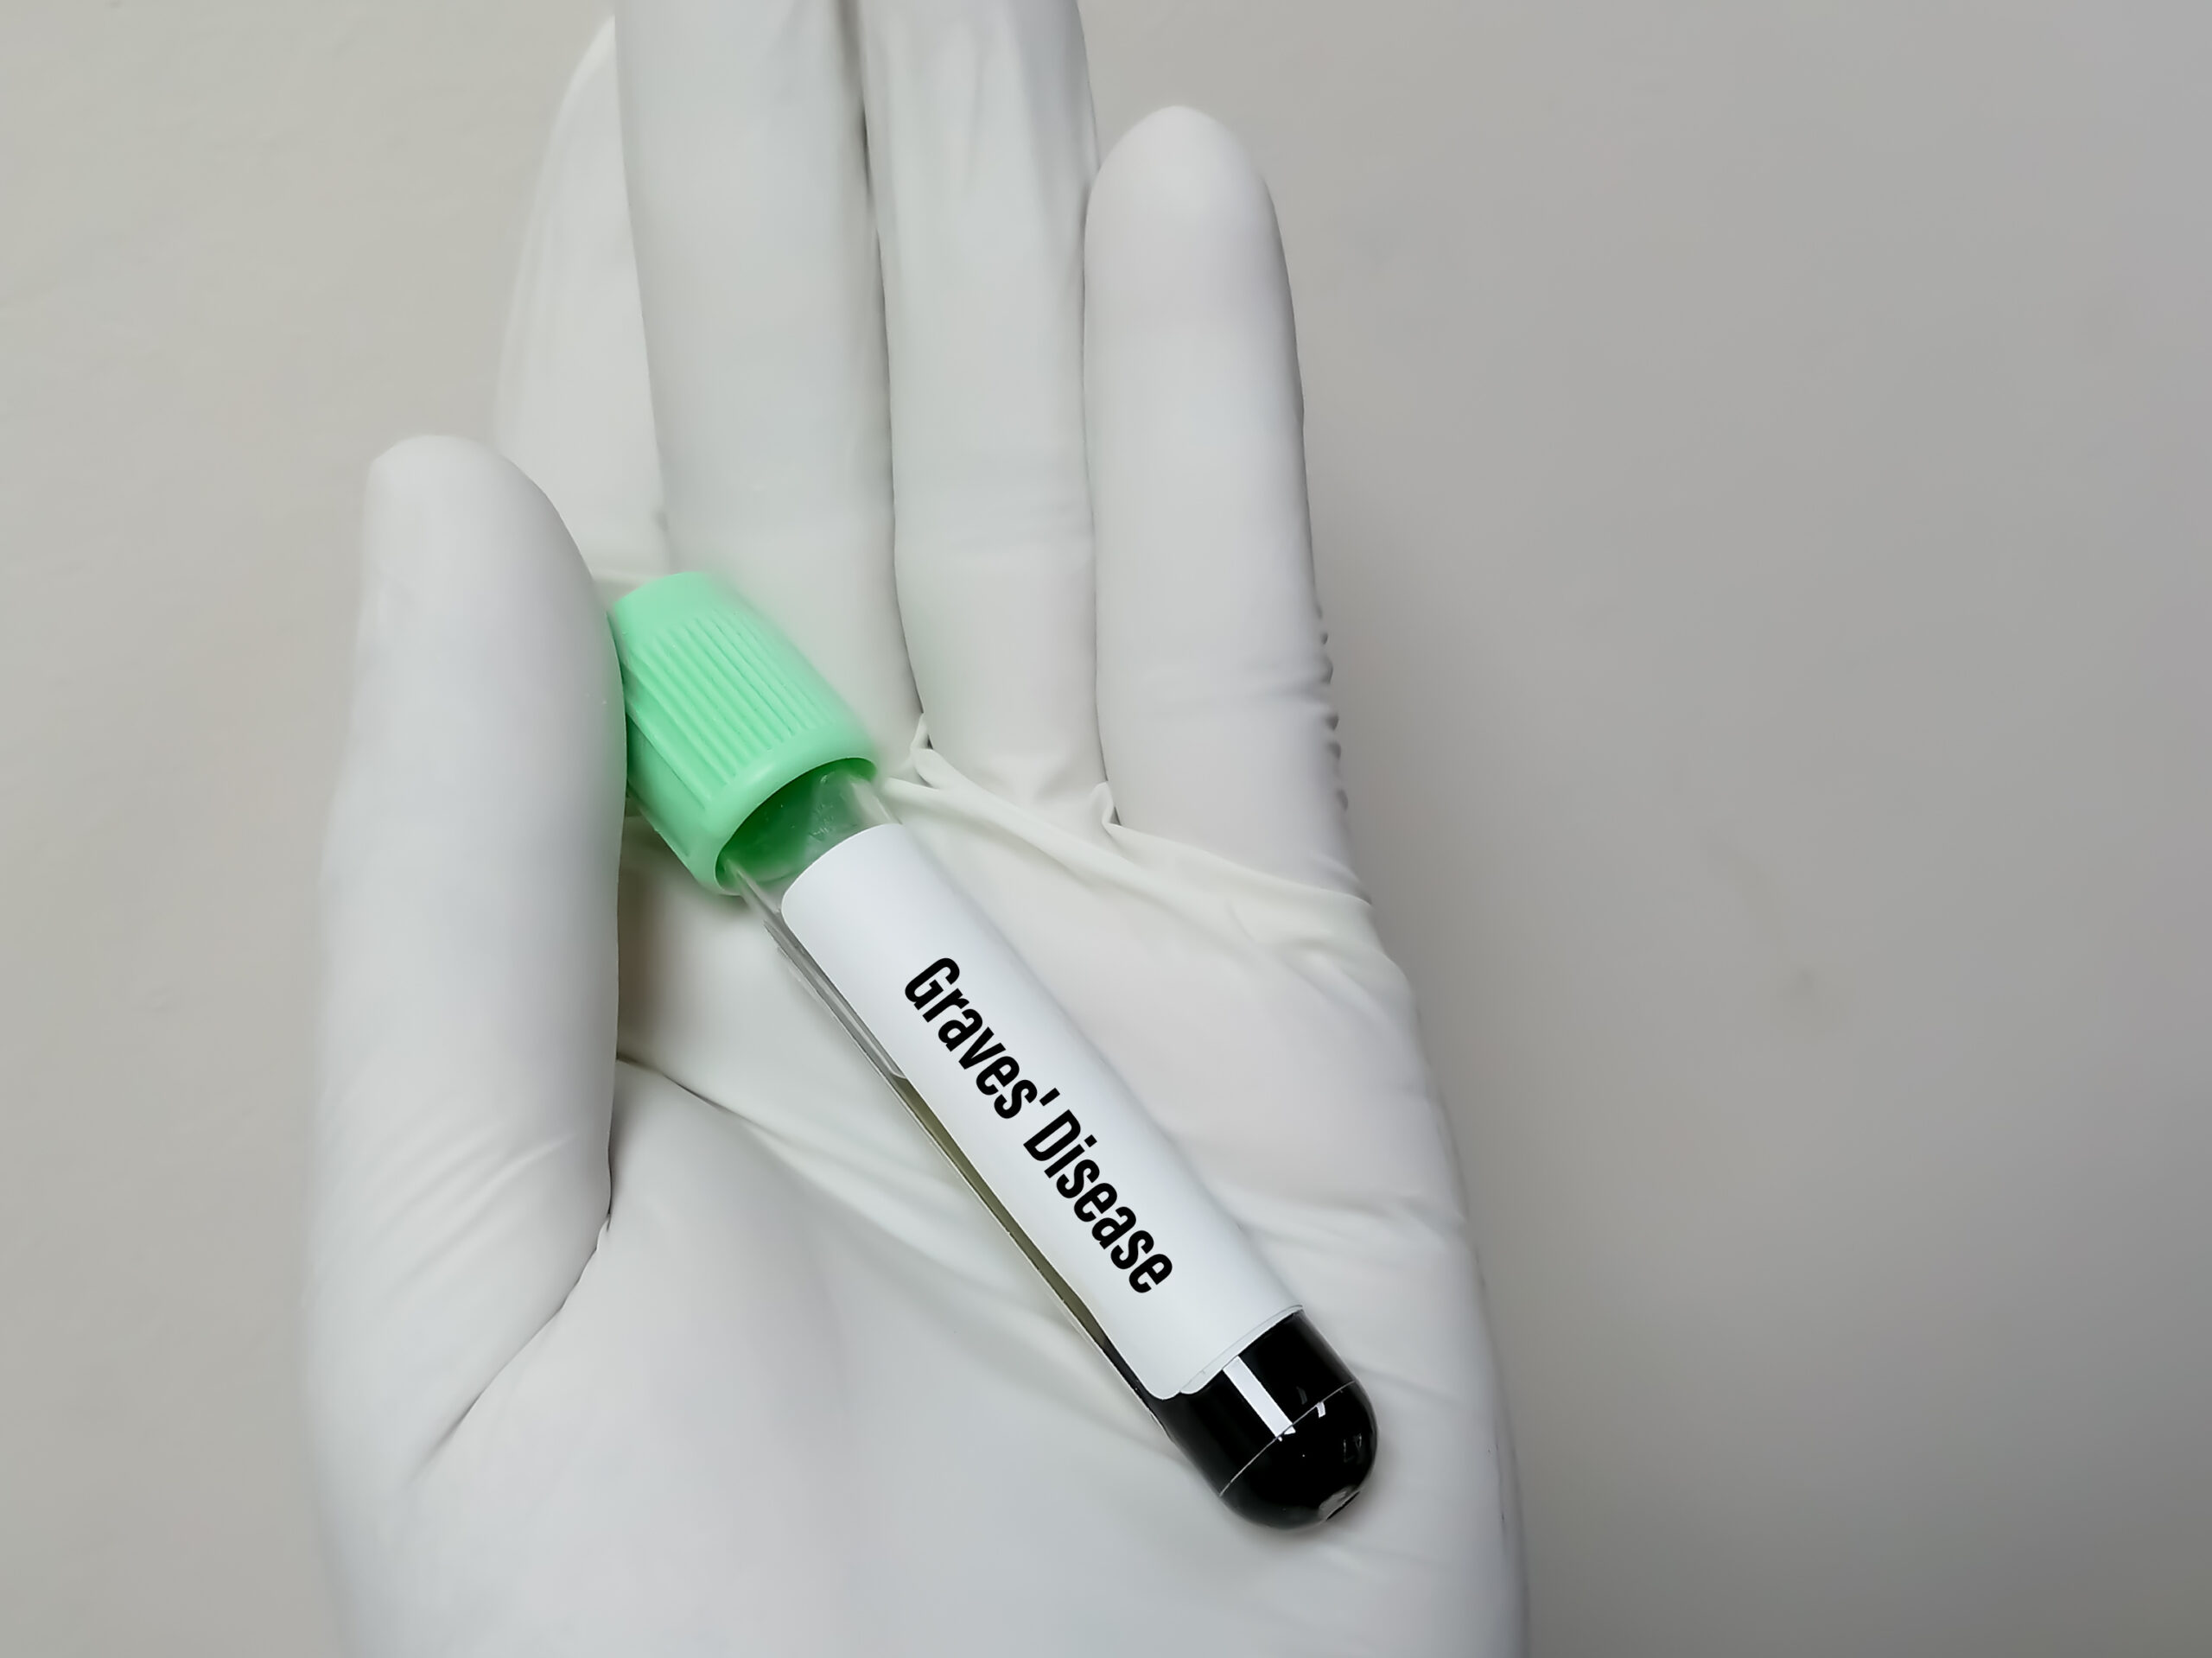 Blood sample tube for Graves’ disease test at medical laboratory. Autoimmune disease that affects the thyroid gland. The gland produces too much thyroid hormone